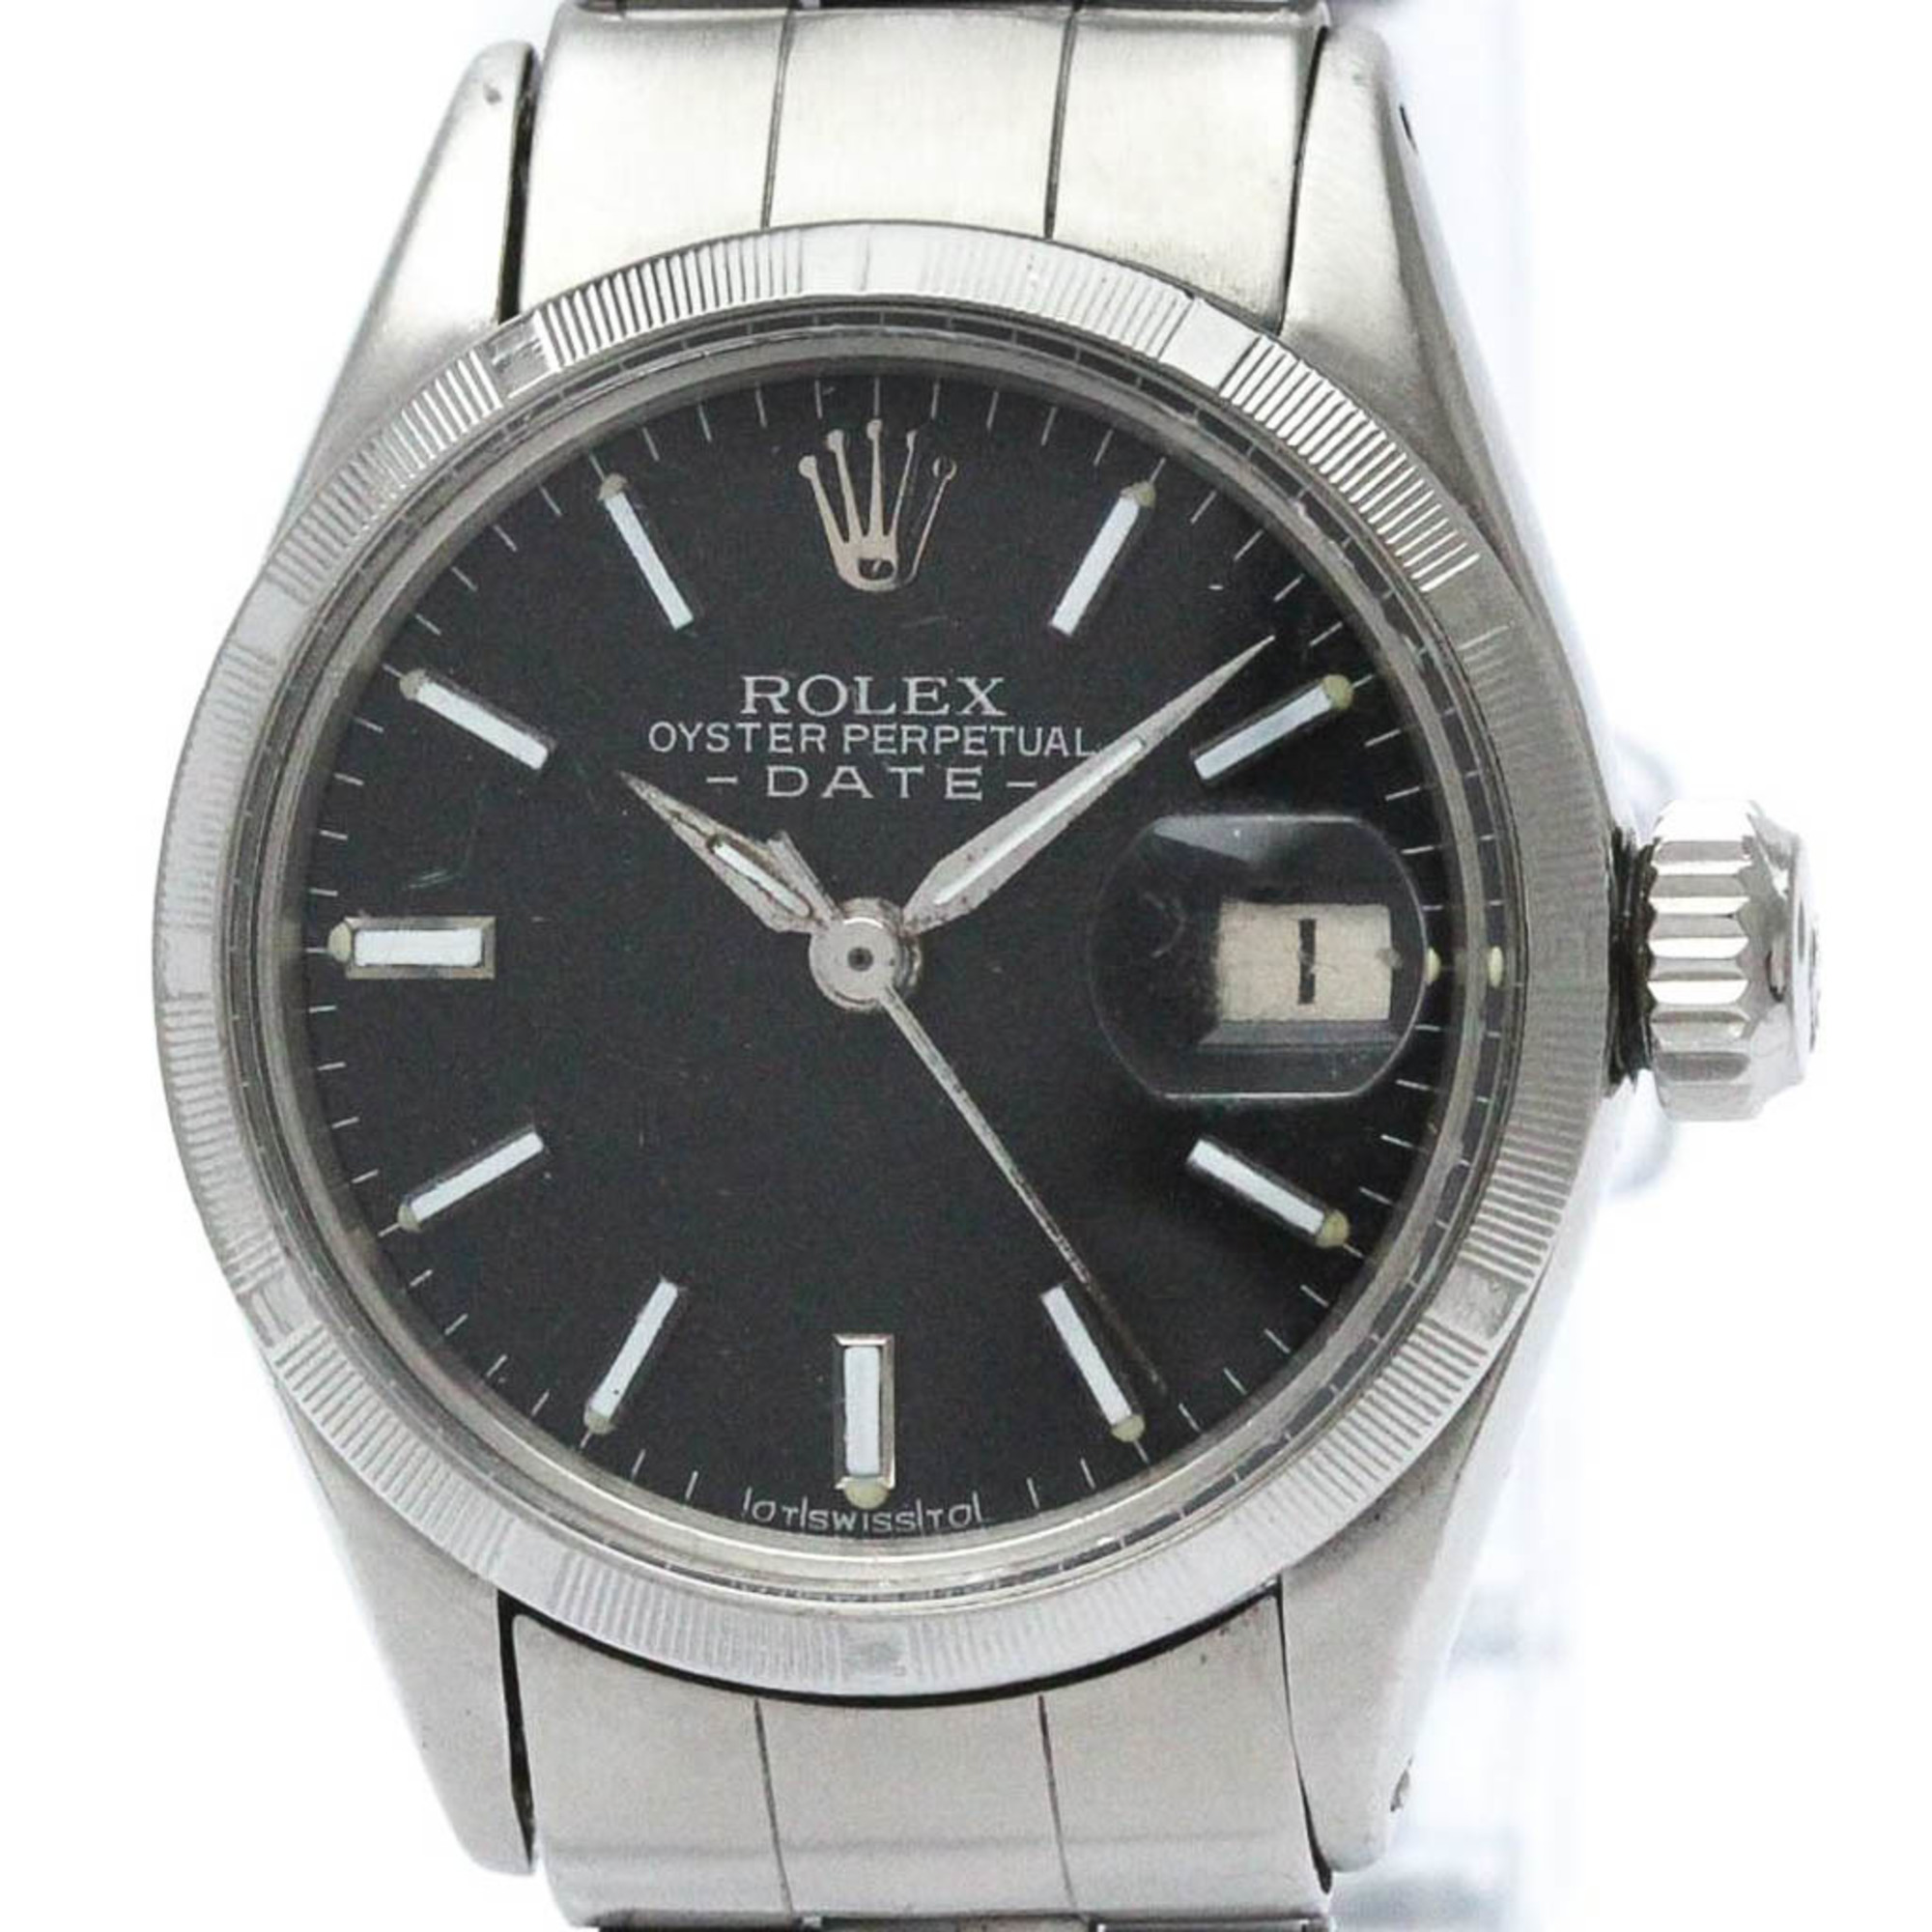 Vintage ROLEX Oyster Perpetual Date 6519 Steel Automatic Ladies Watch BF566827